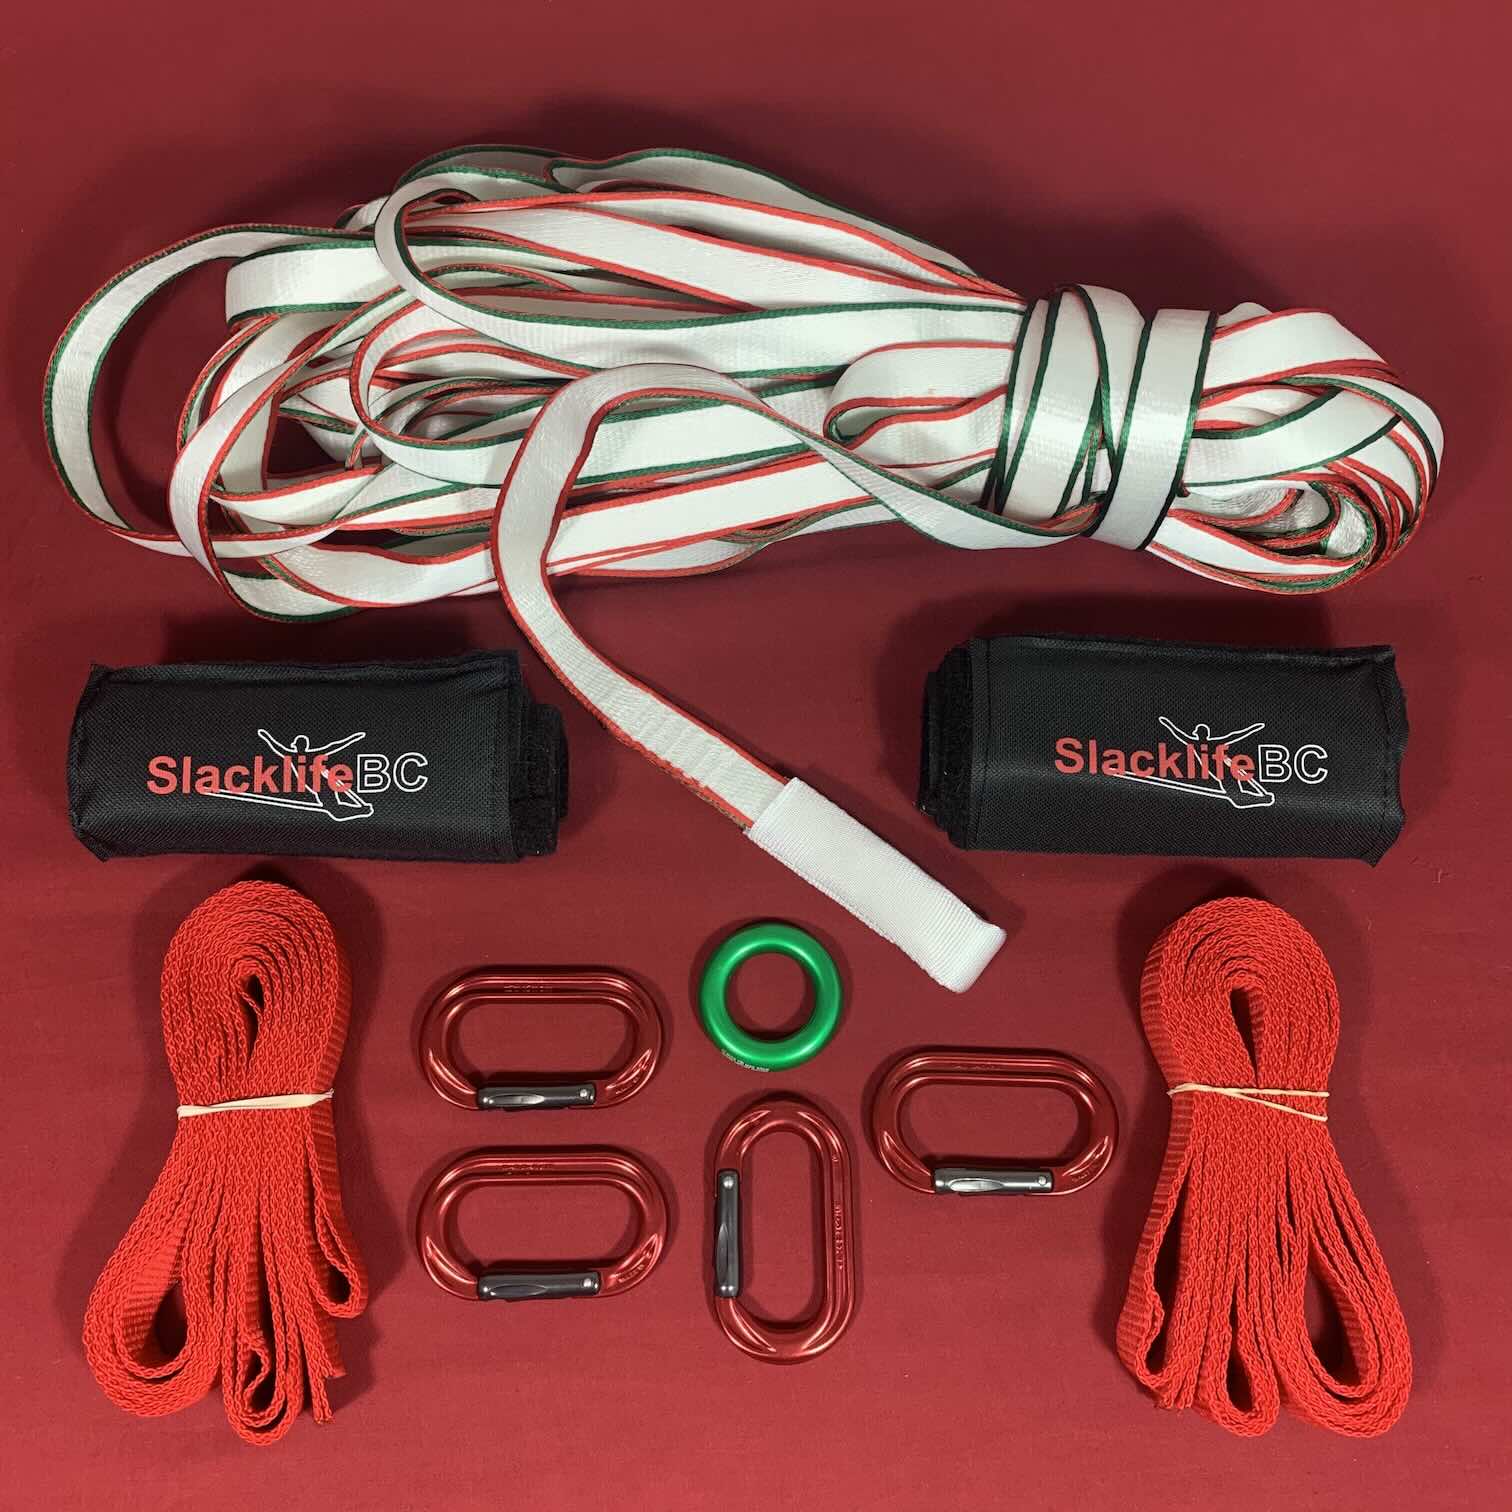 Slackline Kit Review: Unbiased Analysis and Recommendations